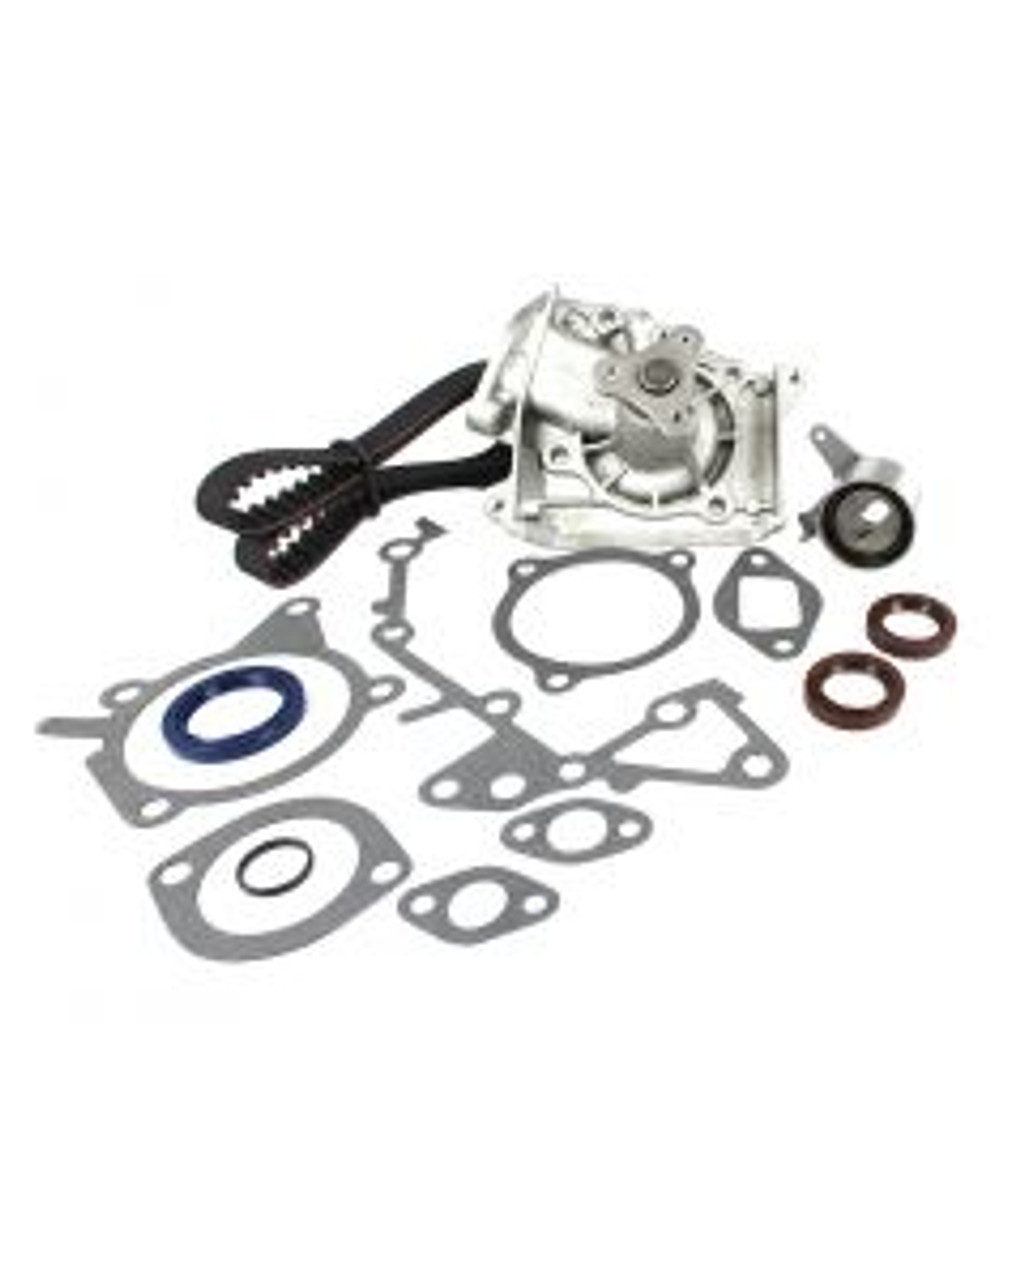 Timing Belt Kit with Water Pump 1.6L 1990 Mazda 323 - TBK451WP.9